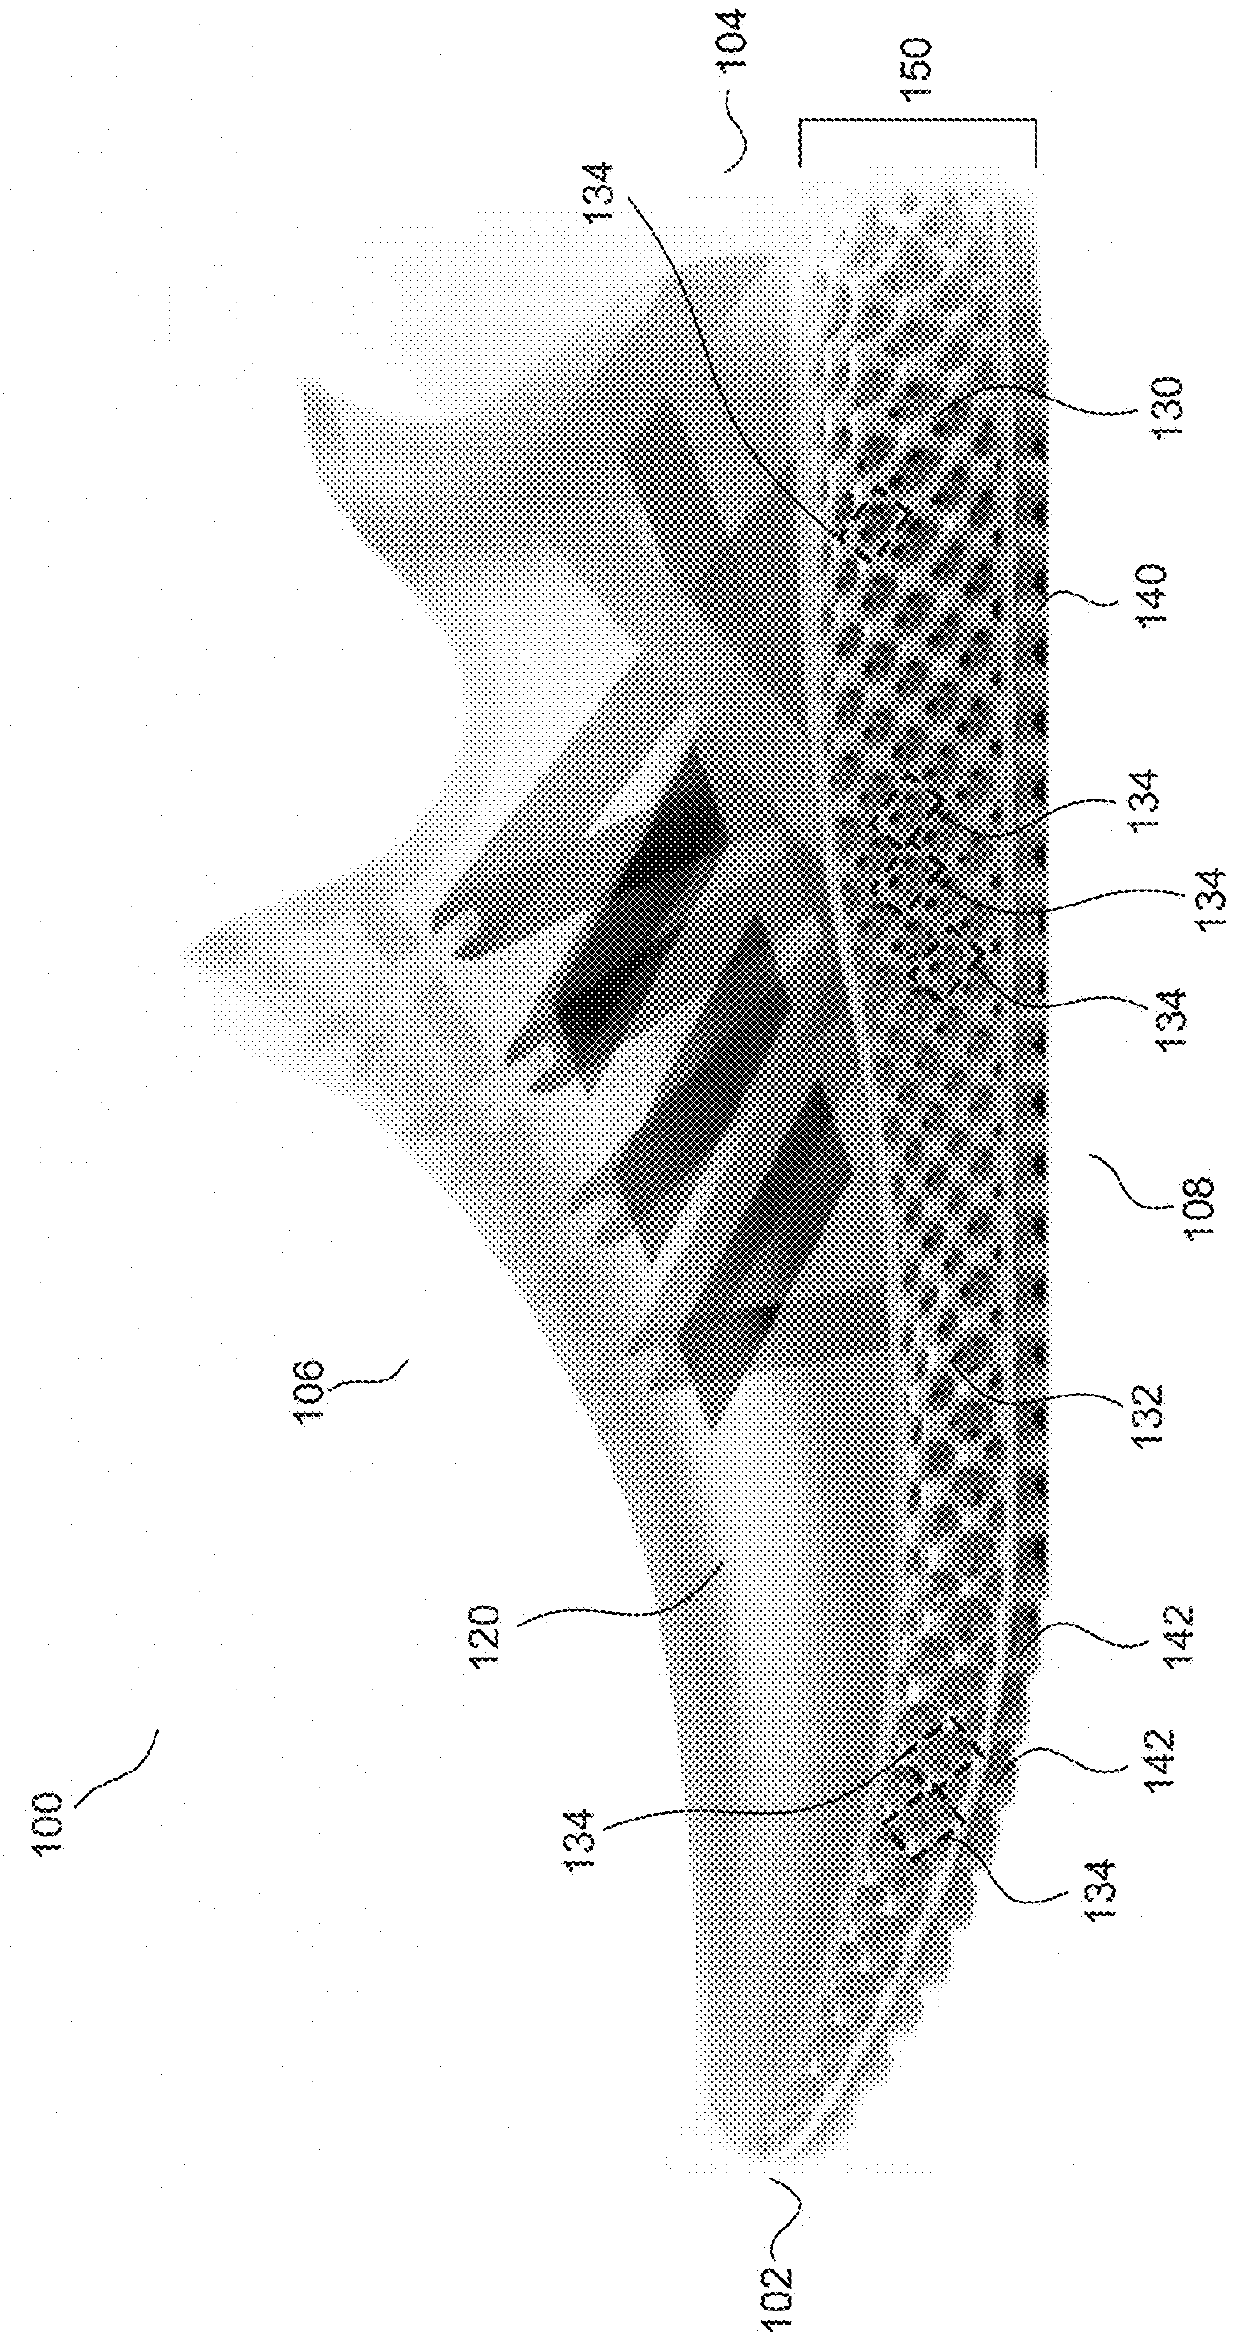 Footwear midsole with warped lattice structure and method of making the same